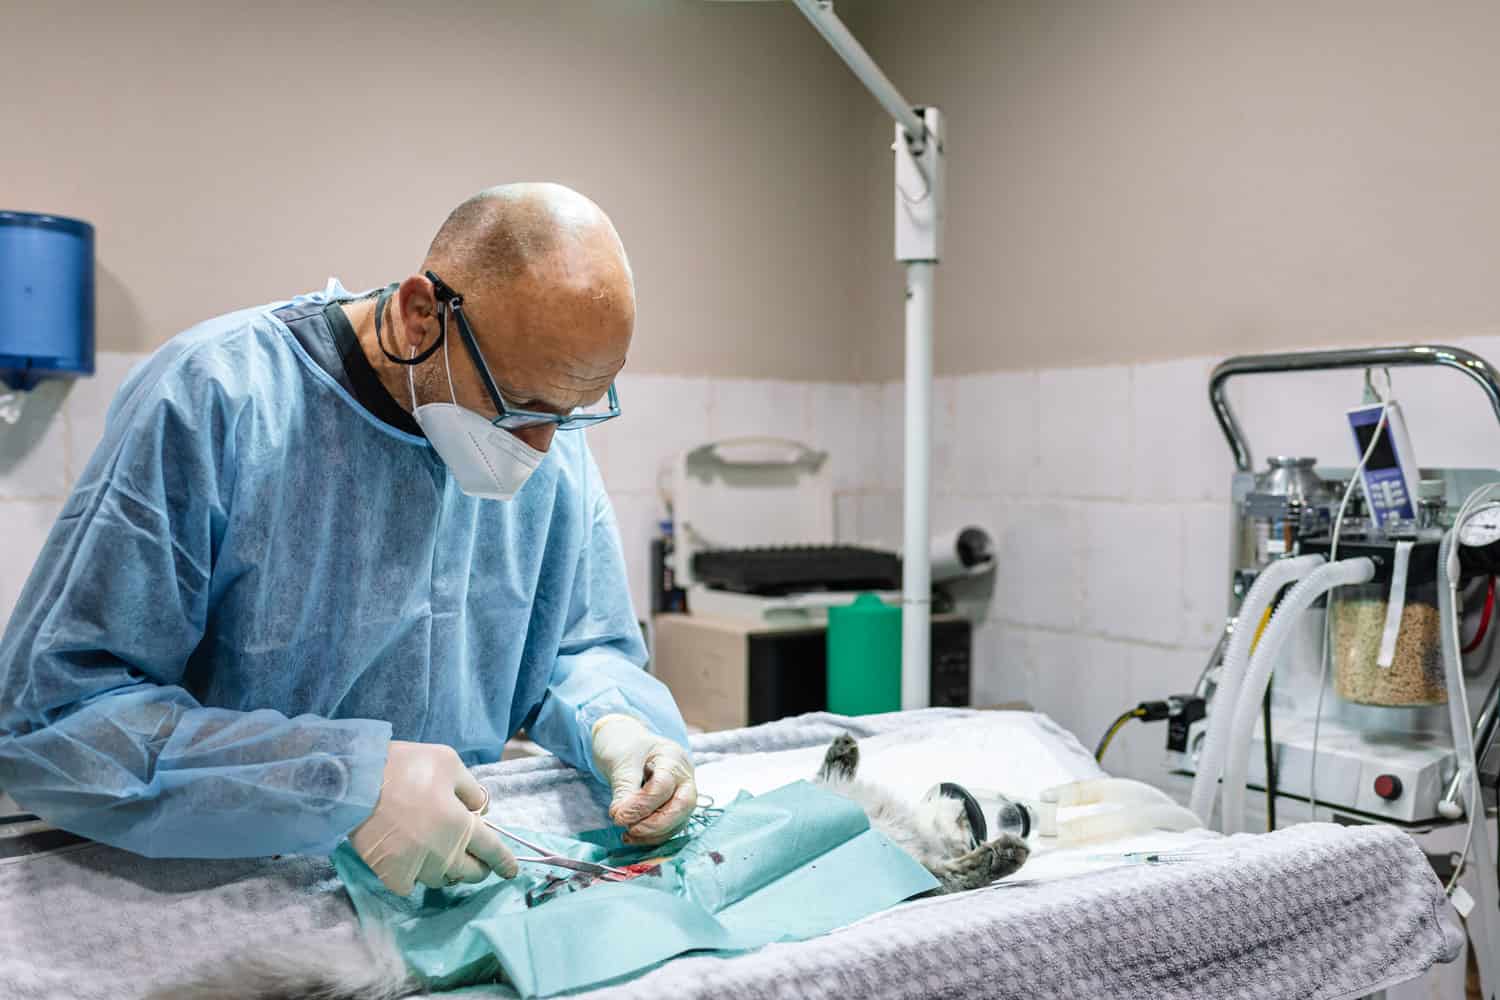 Veterinary surgery in the operating room. Surgeon operating and neutering a cat on the operating table.
